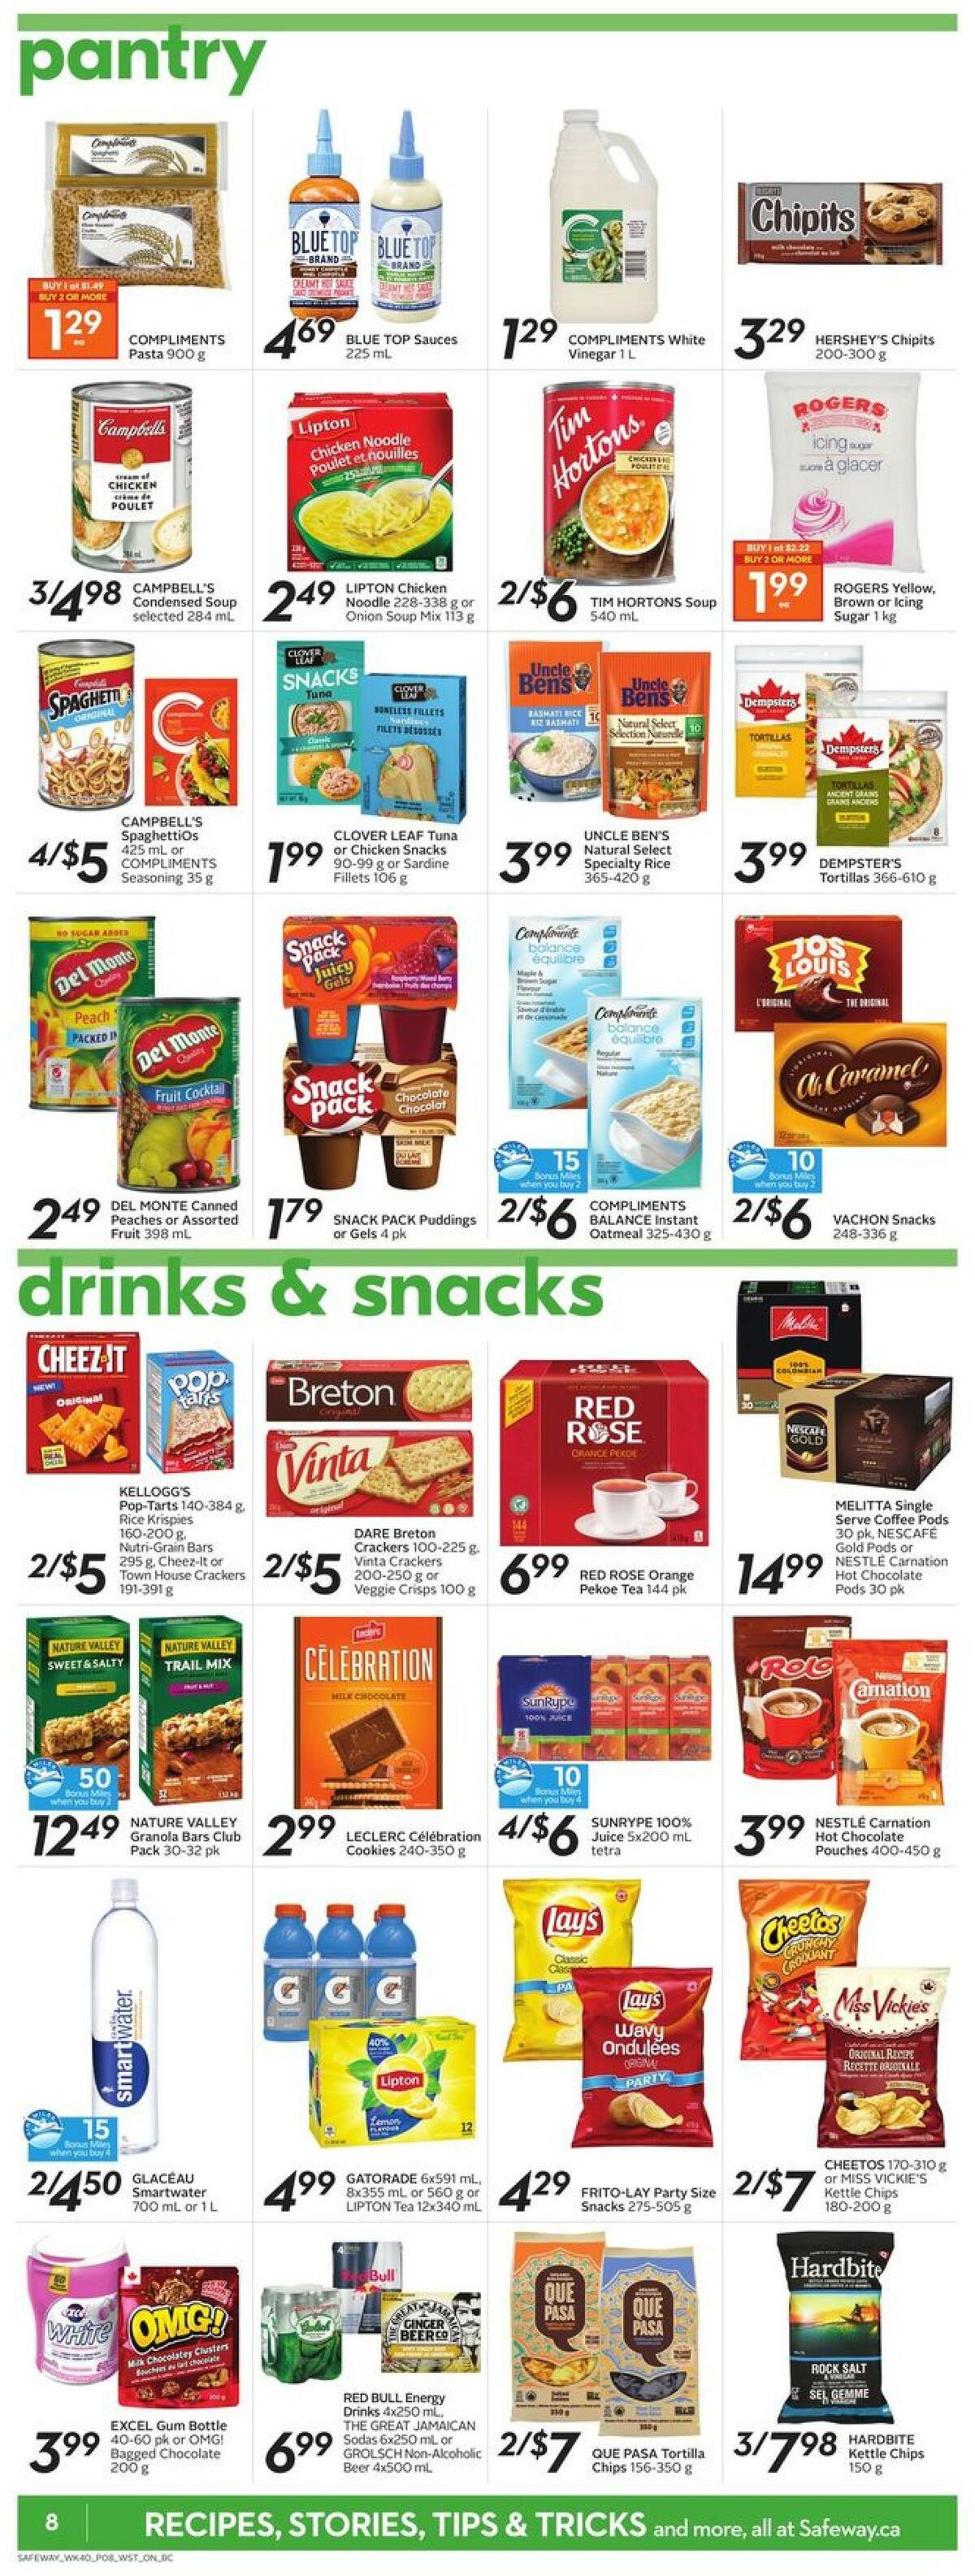 Safeway Flyer from January 28